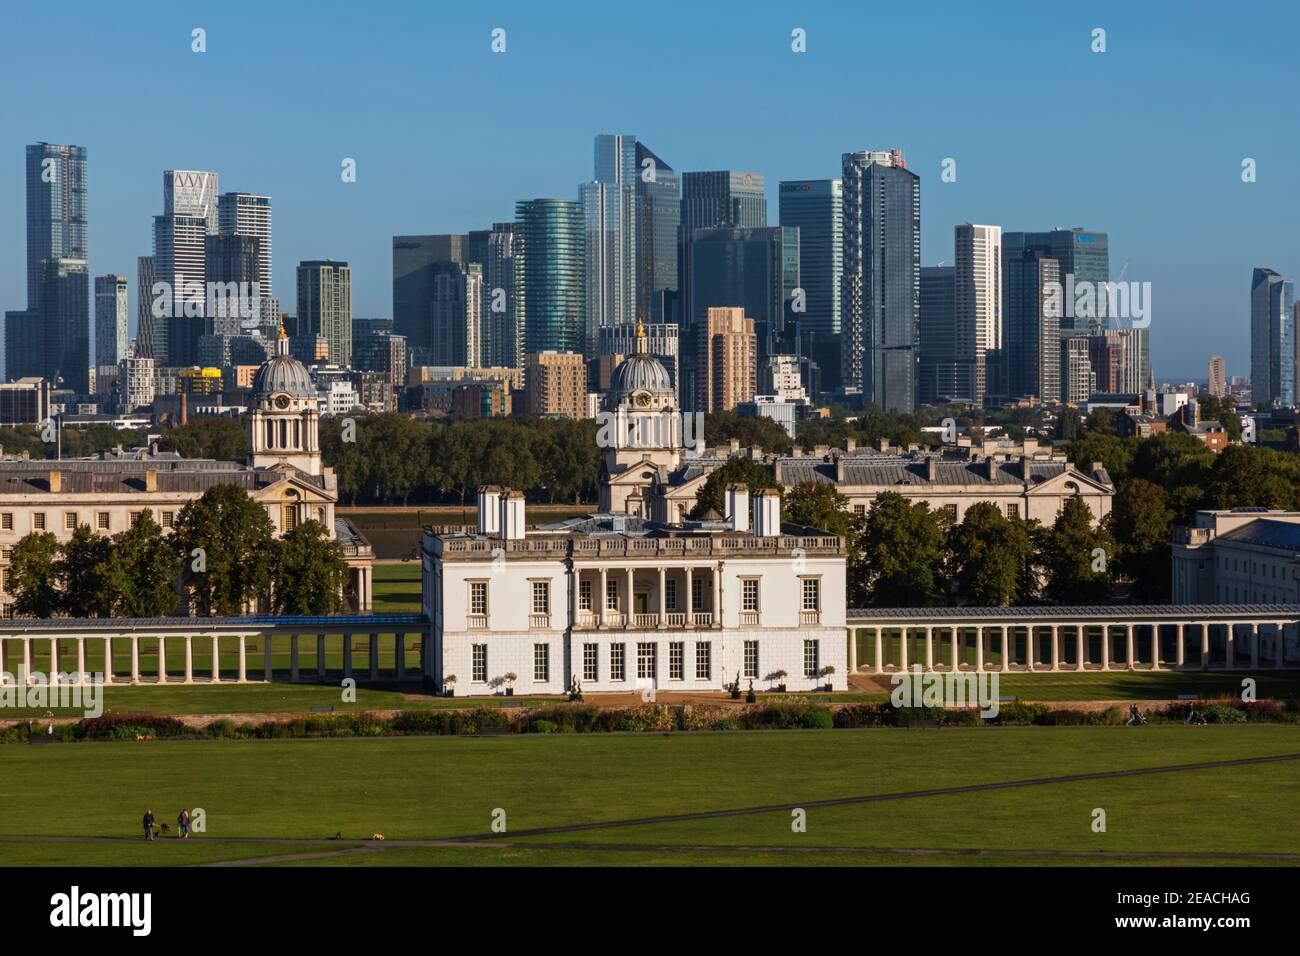 England, London, Greenwich, View of The Queens House and Docklands Skyline from Greenwich Park Stock Photo